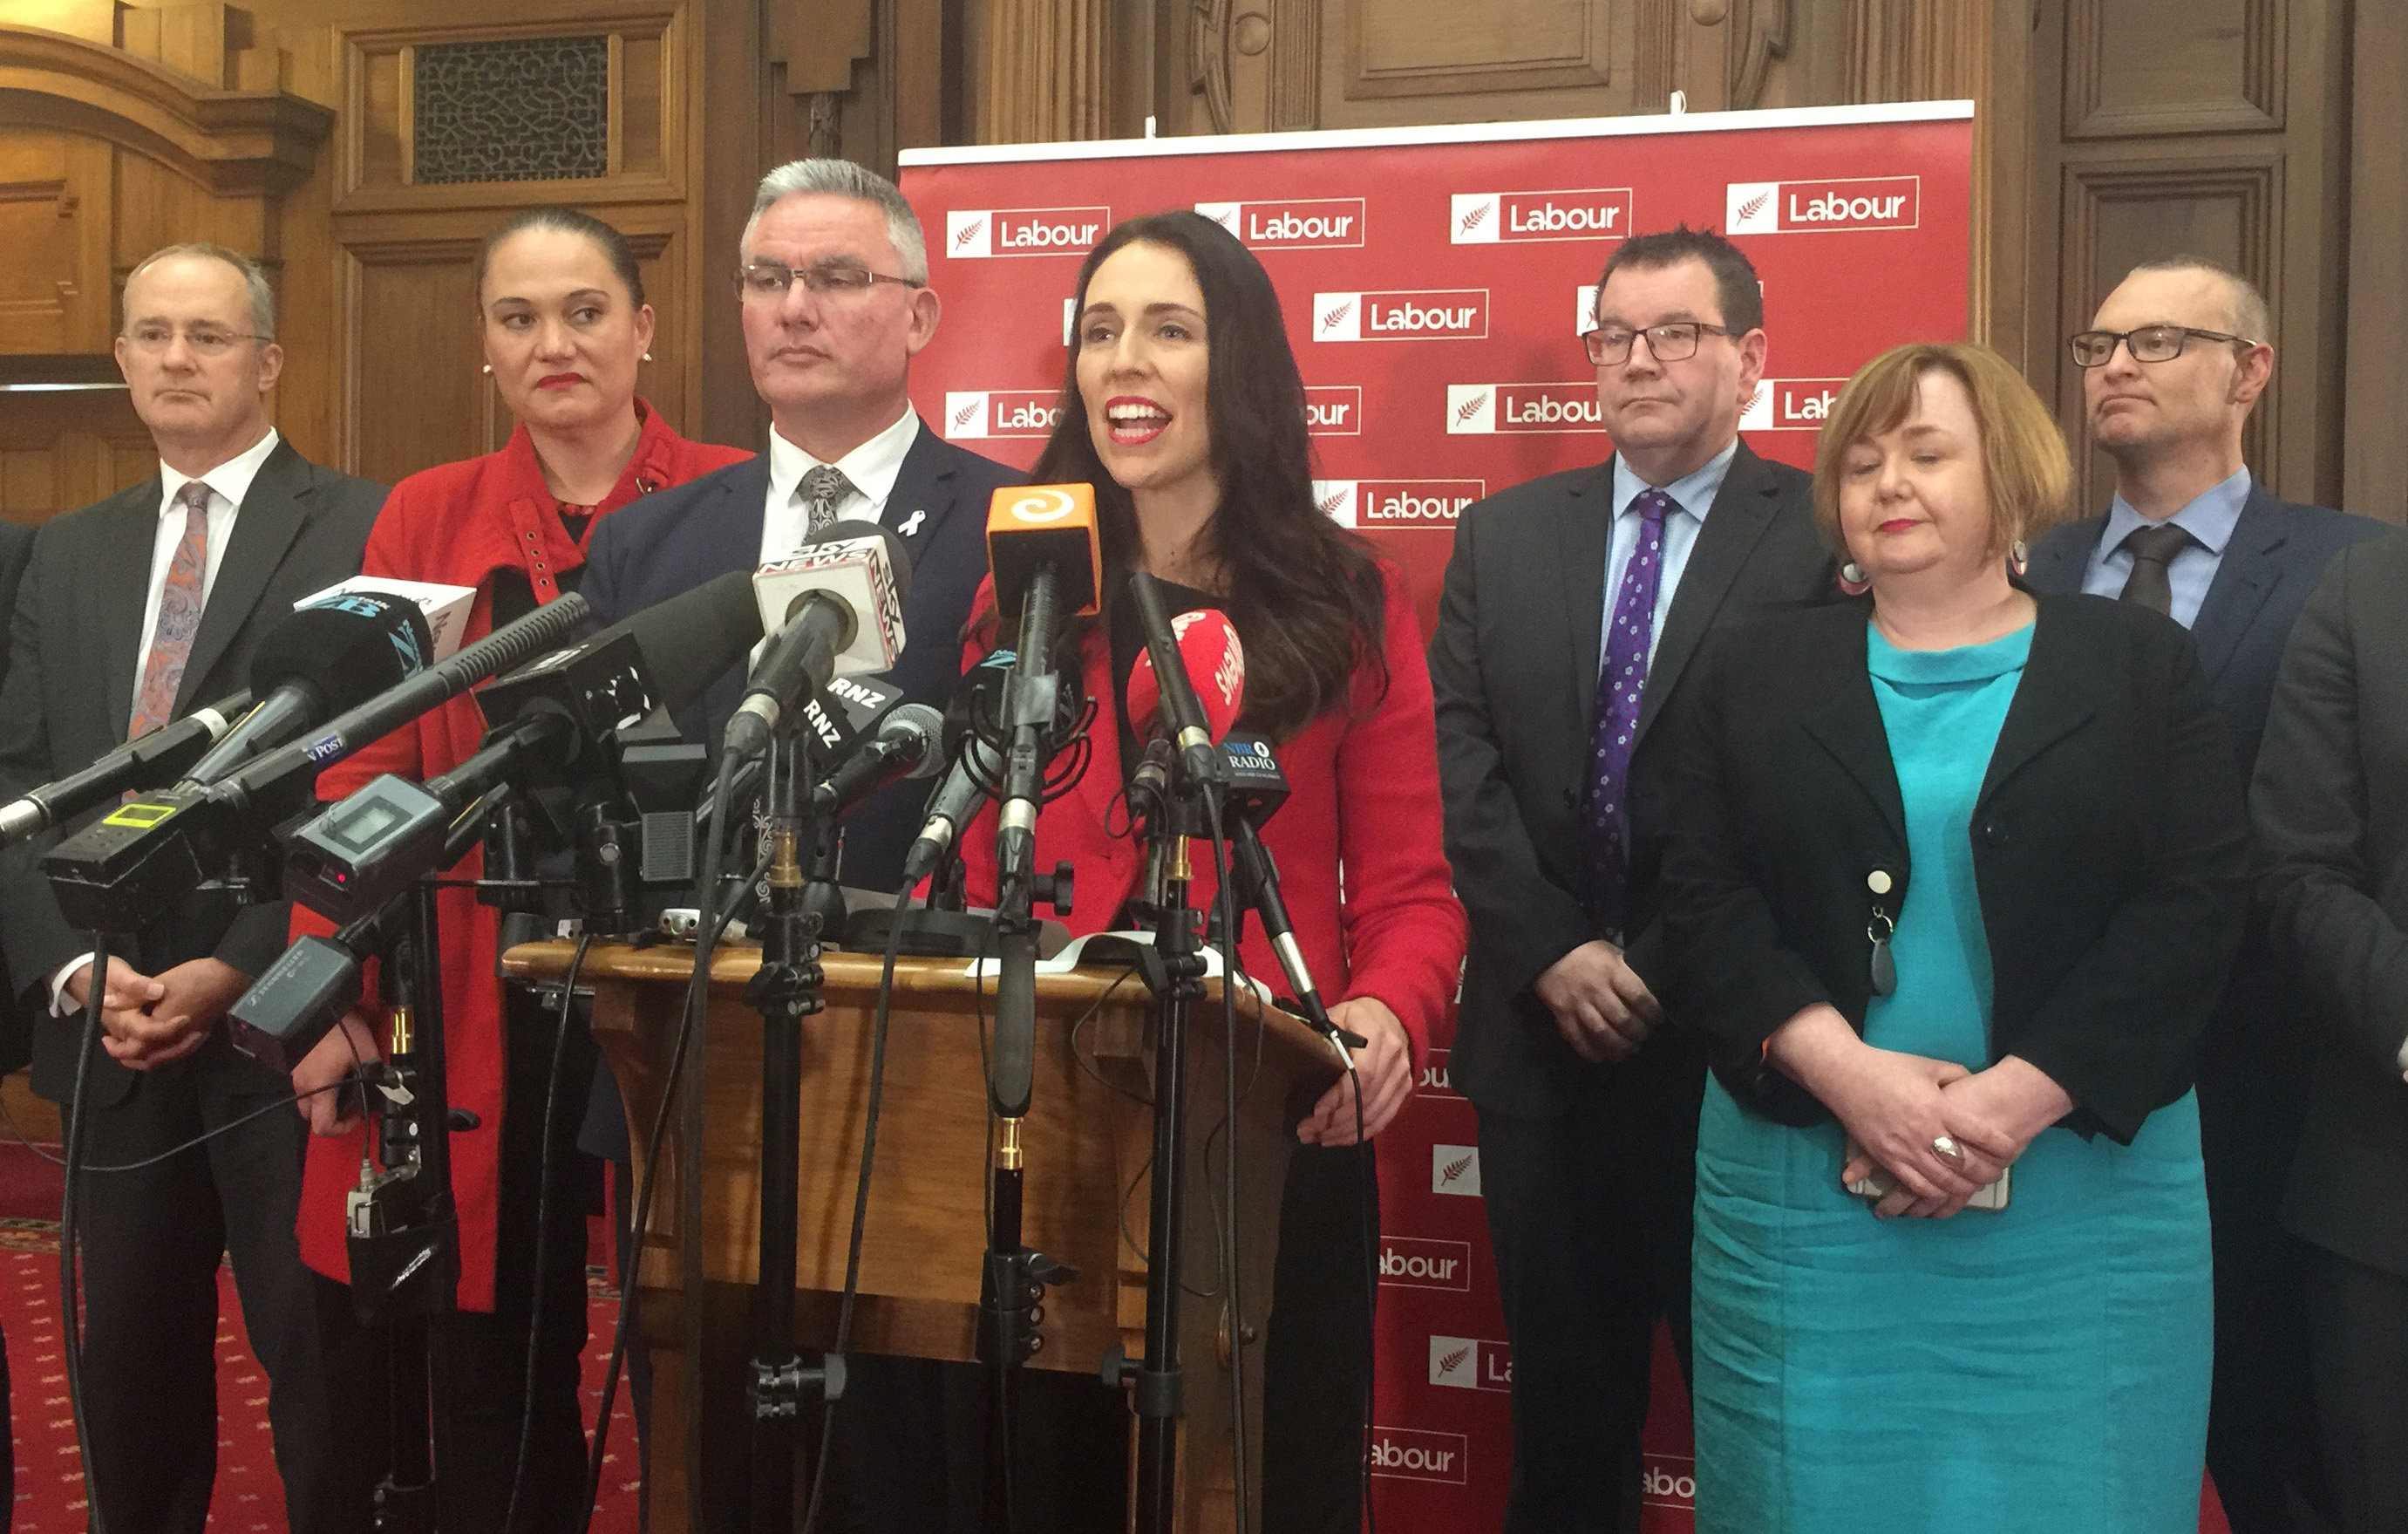 Change of Labour party leader breathes fresh life into New Zealand election